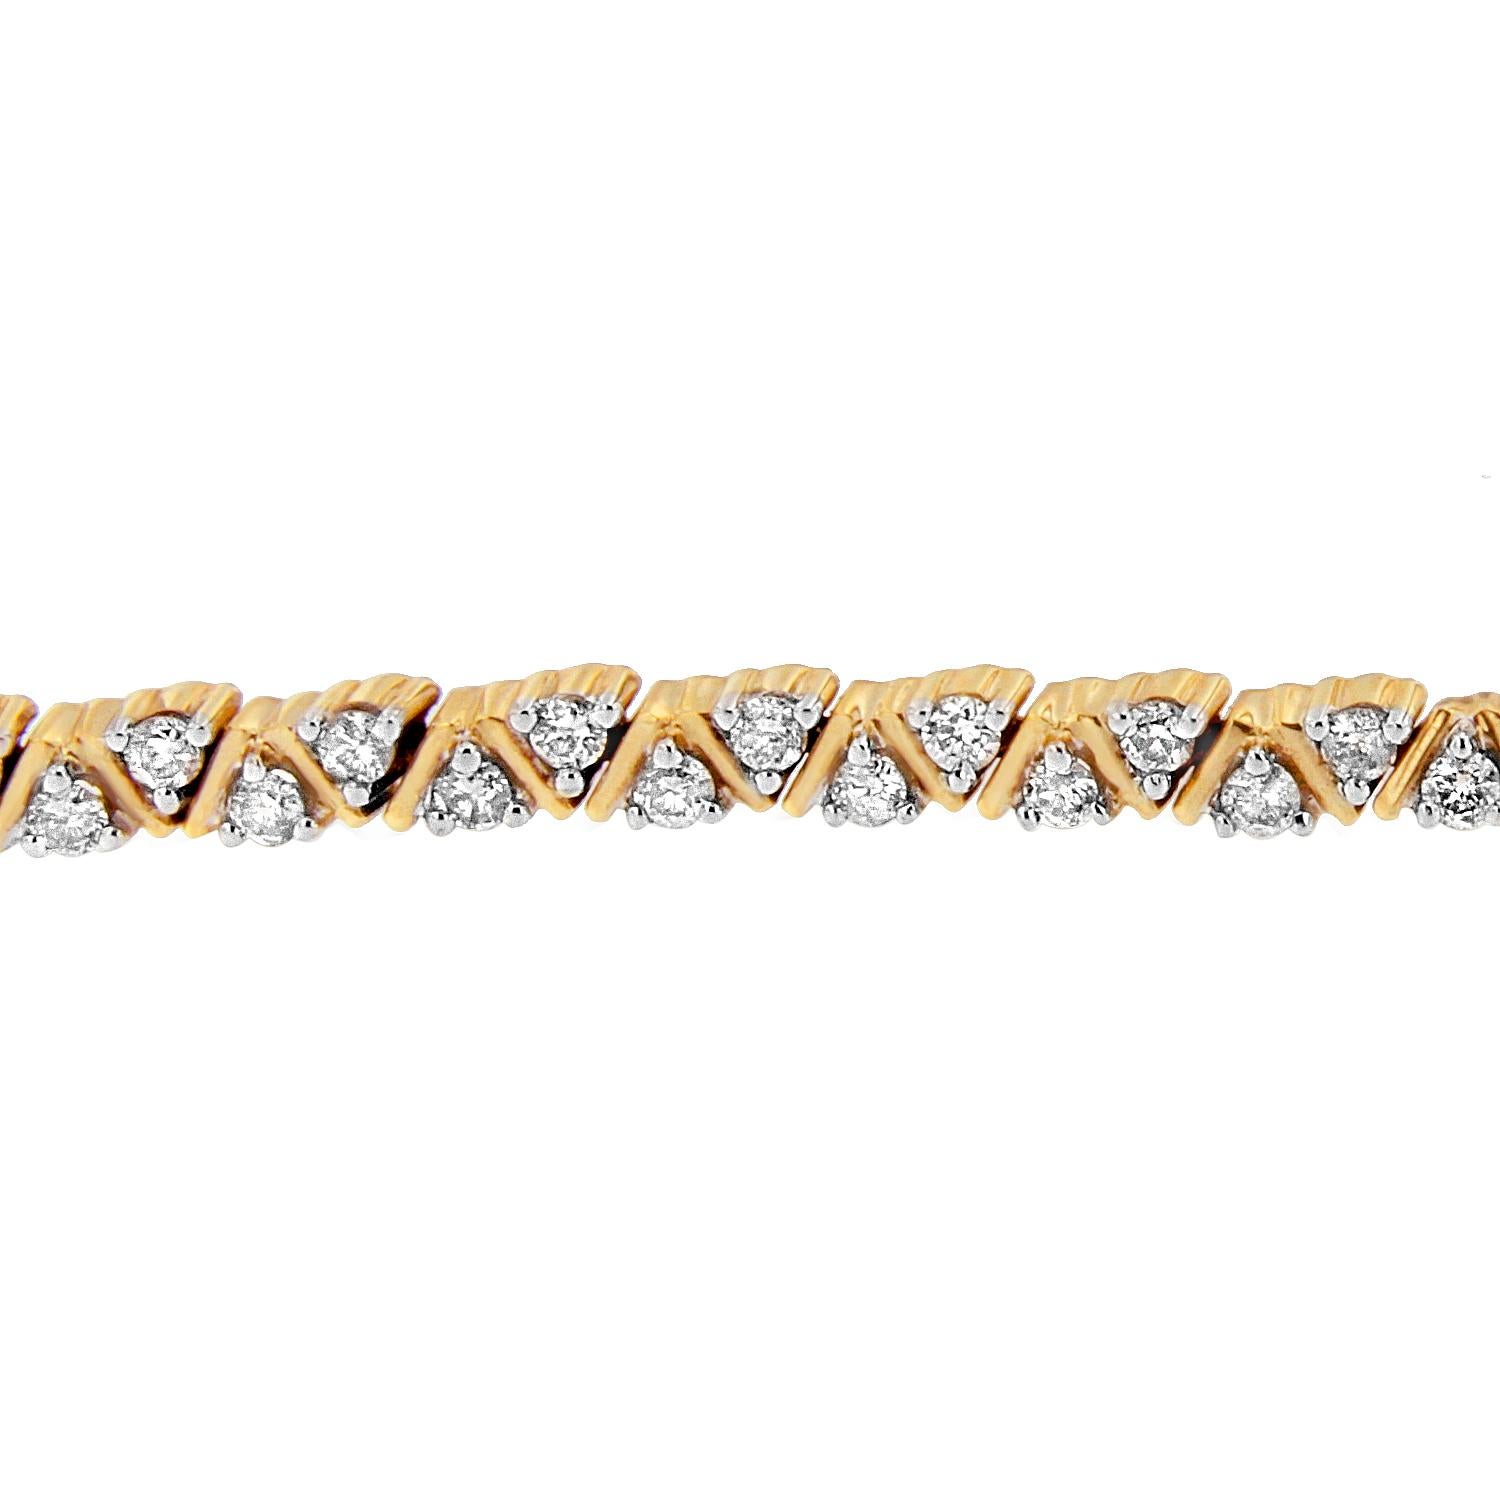 When brilliance and illumination take over, her wrist radiates a shine unlike any other. In the middle the fascination of glistening round cut diamonds is breathtaking. This tennis bracelet featuring triangular pattern with encrusting of 14 karats